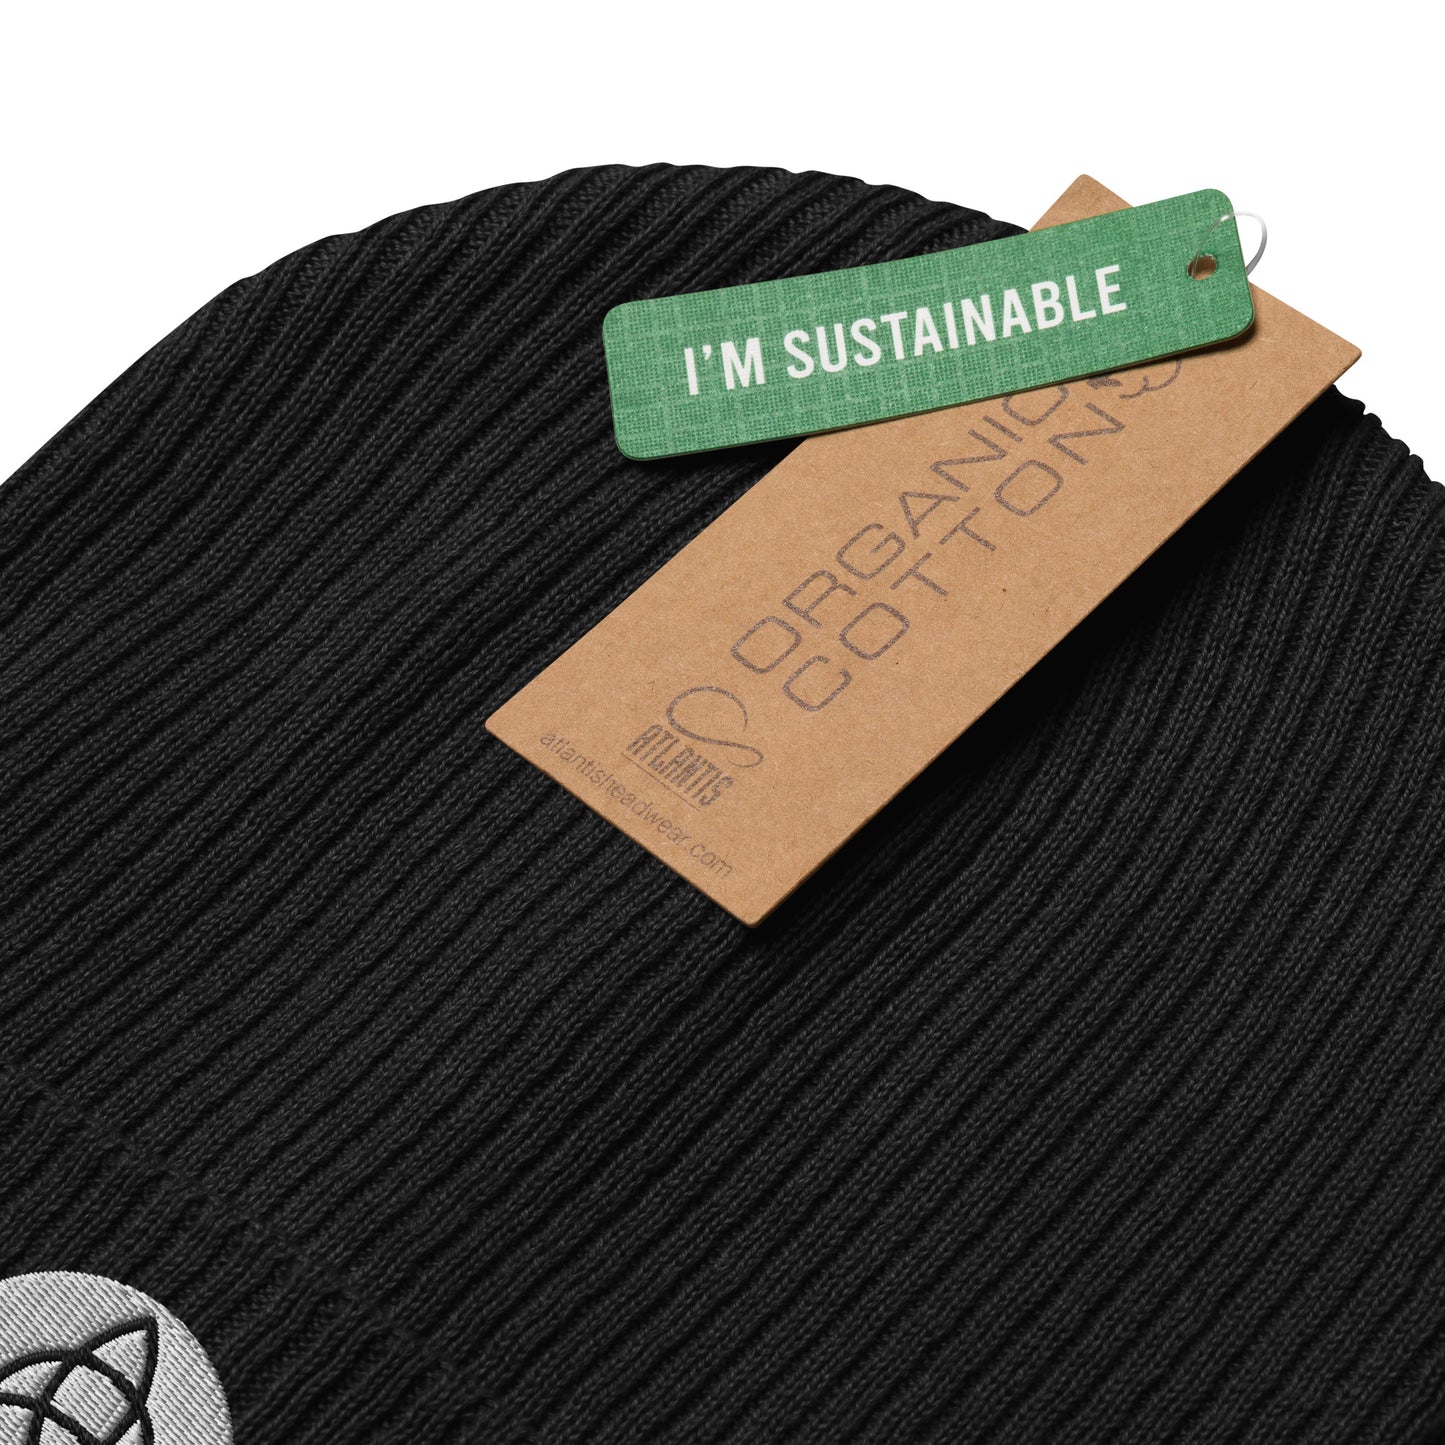 A ribbed beanie in Midnight Black hat made of organic cotton, embroidered with a Triquetra symbol, symbolizing unity, eternity, and the interconnectedness of mind, body, and spirit. This organic ribbed beanie is chic, versatile, and environmentally conscious, making it an essential addition to your hat collection. Crafted from breathable lightweight fabric, it's suitable for both indoor and outdoor wear. Made with hypoallergenic and natural materials. with a label of I'M Sustainable